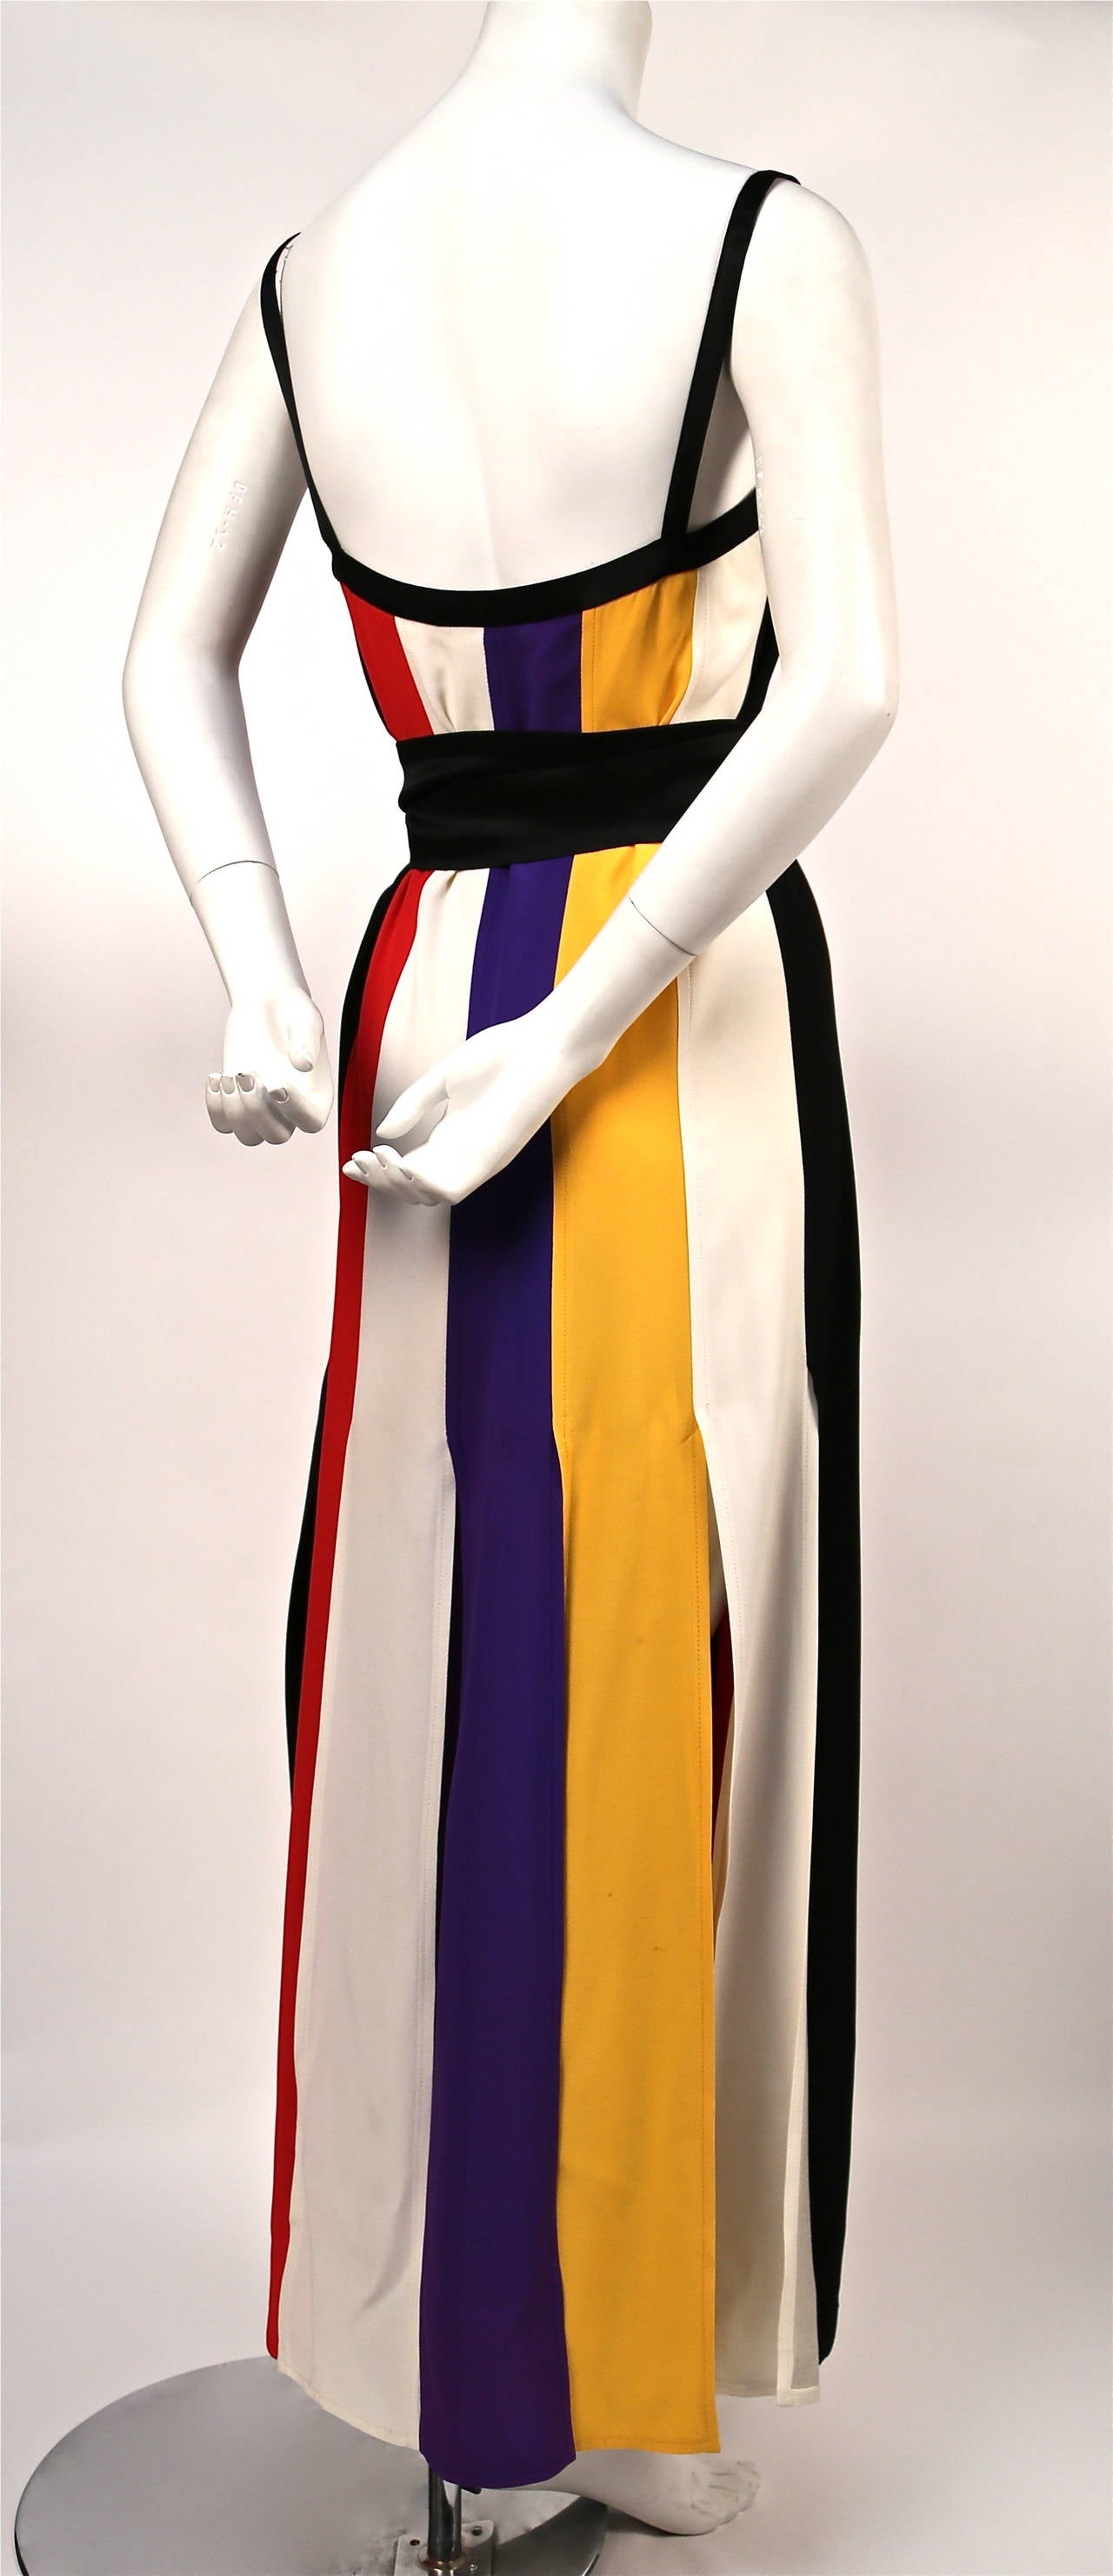 Colorful striped crepe dress with black satin straps, square neckline, carwash hemline and extra long black satin belt from Yves Saint Laurent dating to the 1970's. Labeled a French size 40 although this best fits a US 4-6. Approximate measurements: